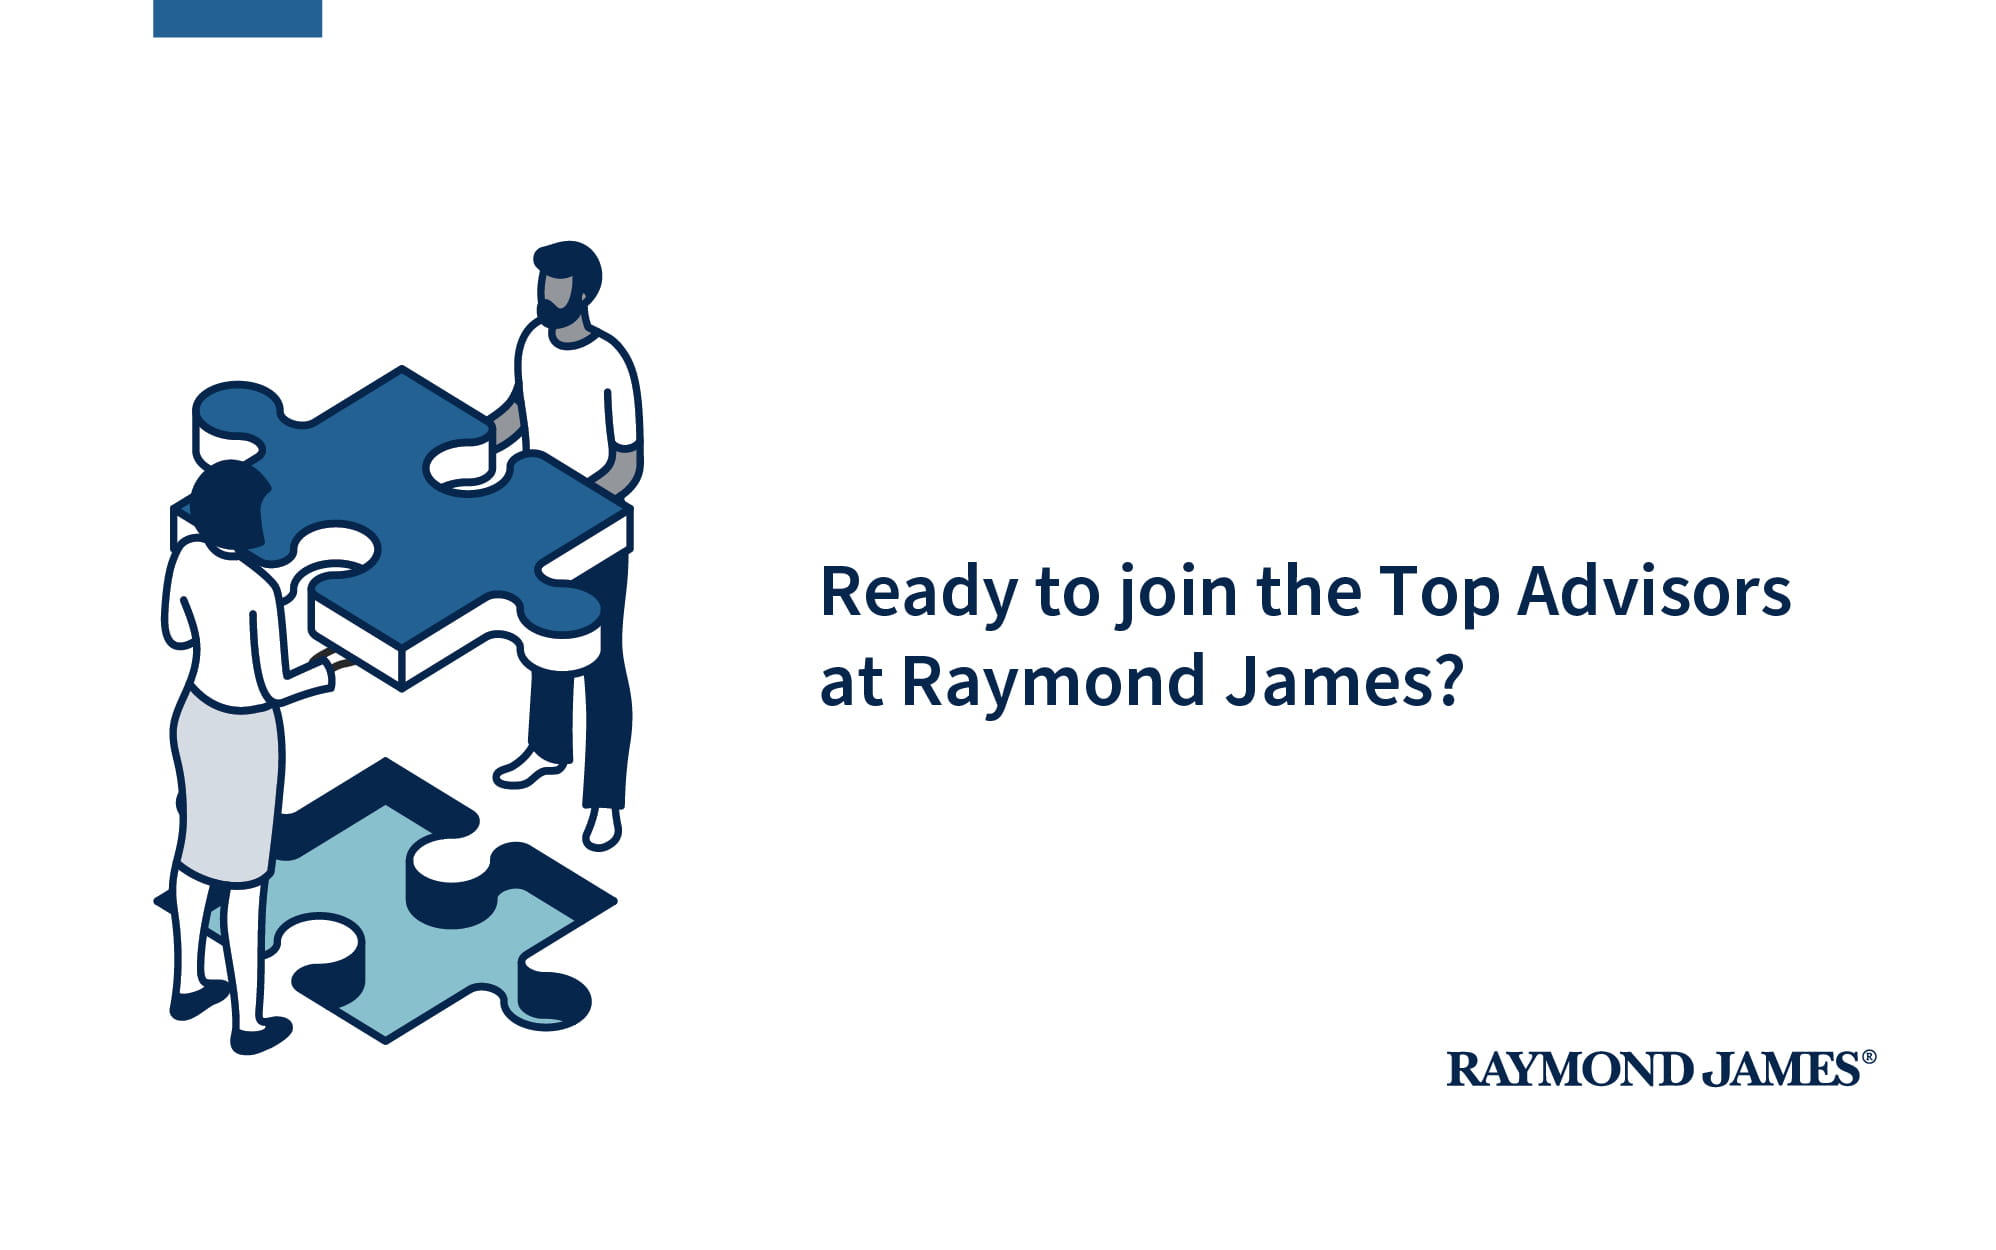 Ready to join the Top Advisors at Raymond James?